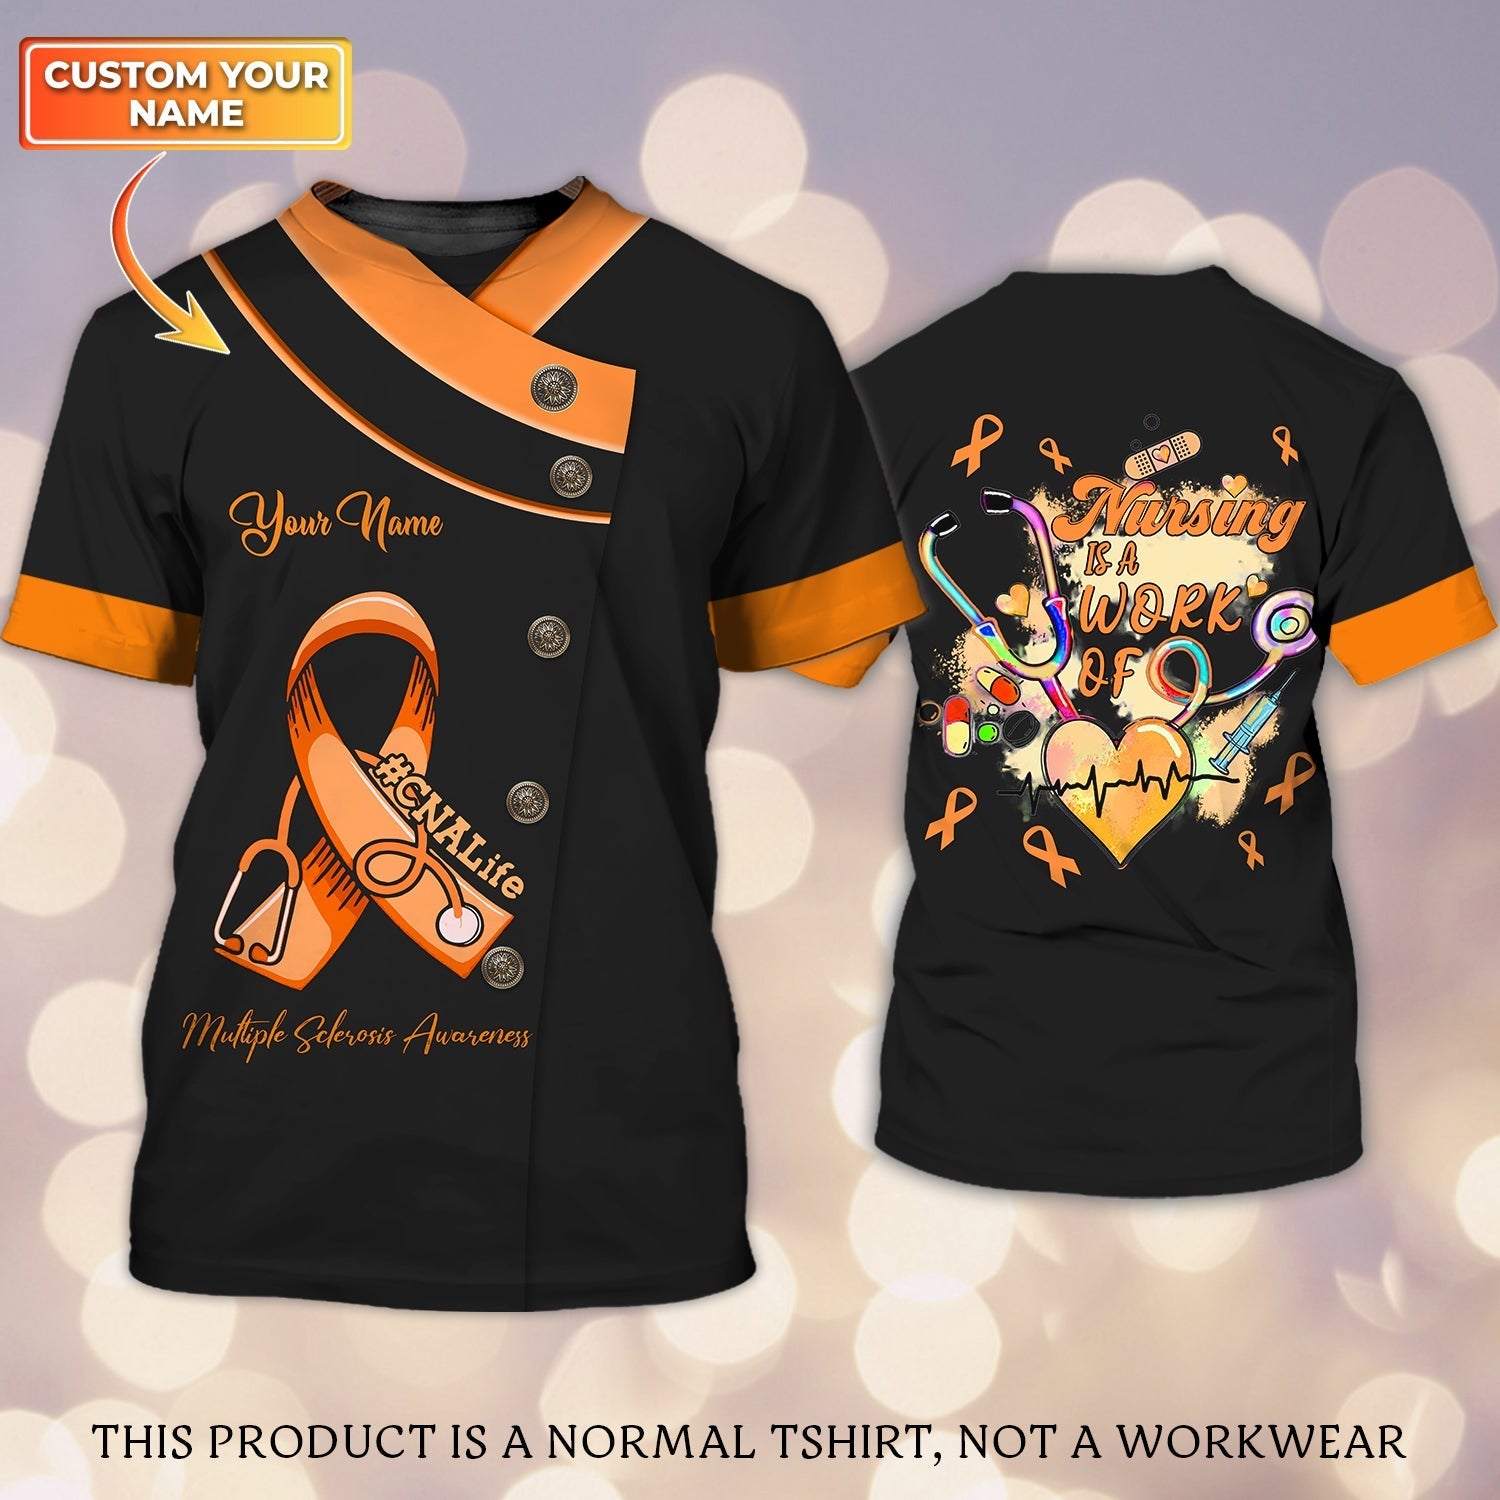 Cnalife Multiple Sclerosis Awareness Personalized Name 3D Tshirt Tad (Non Workwear)